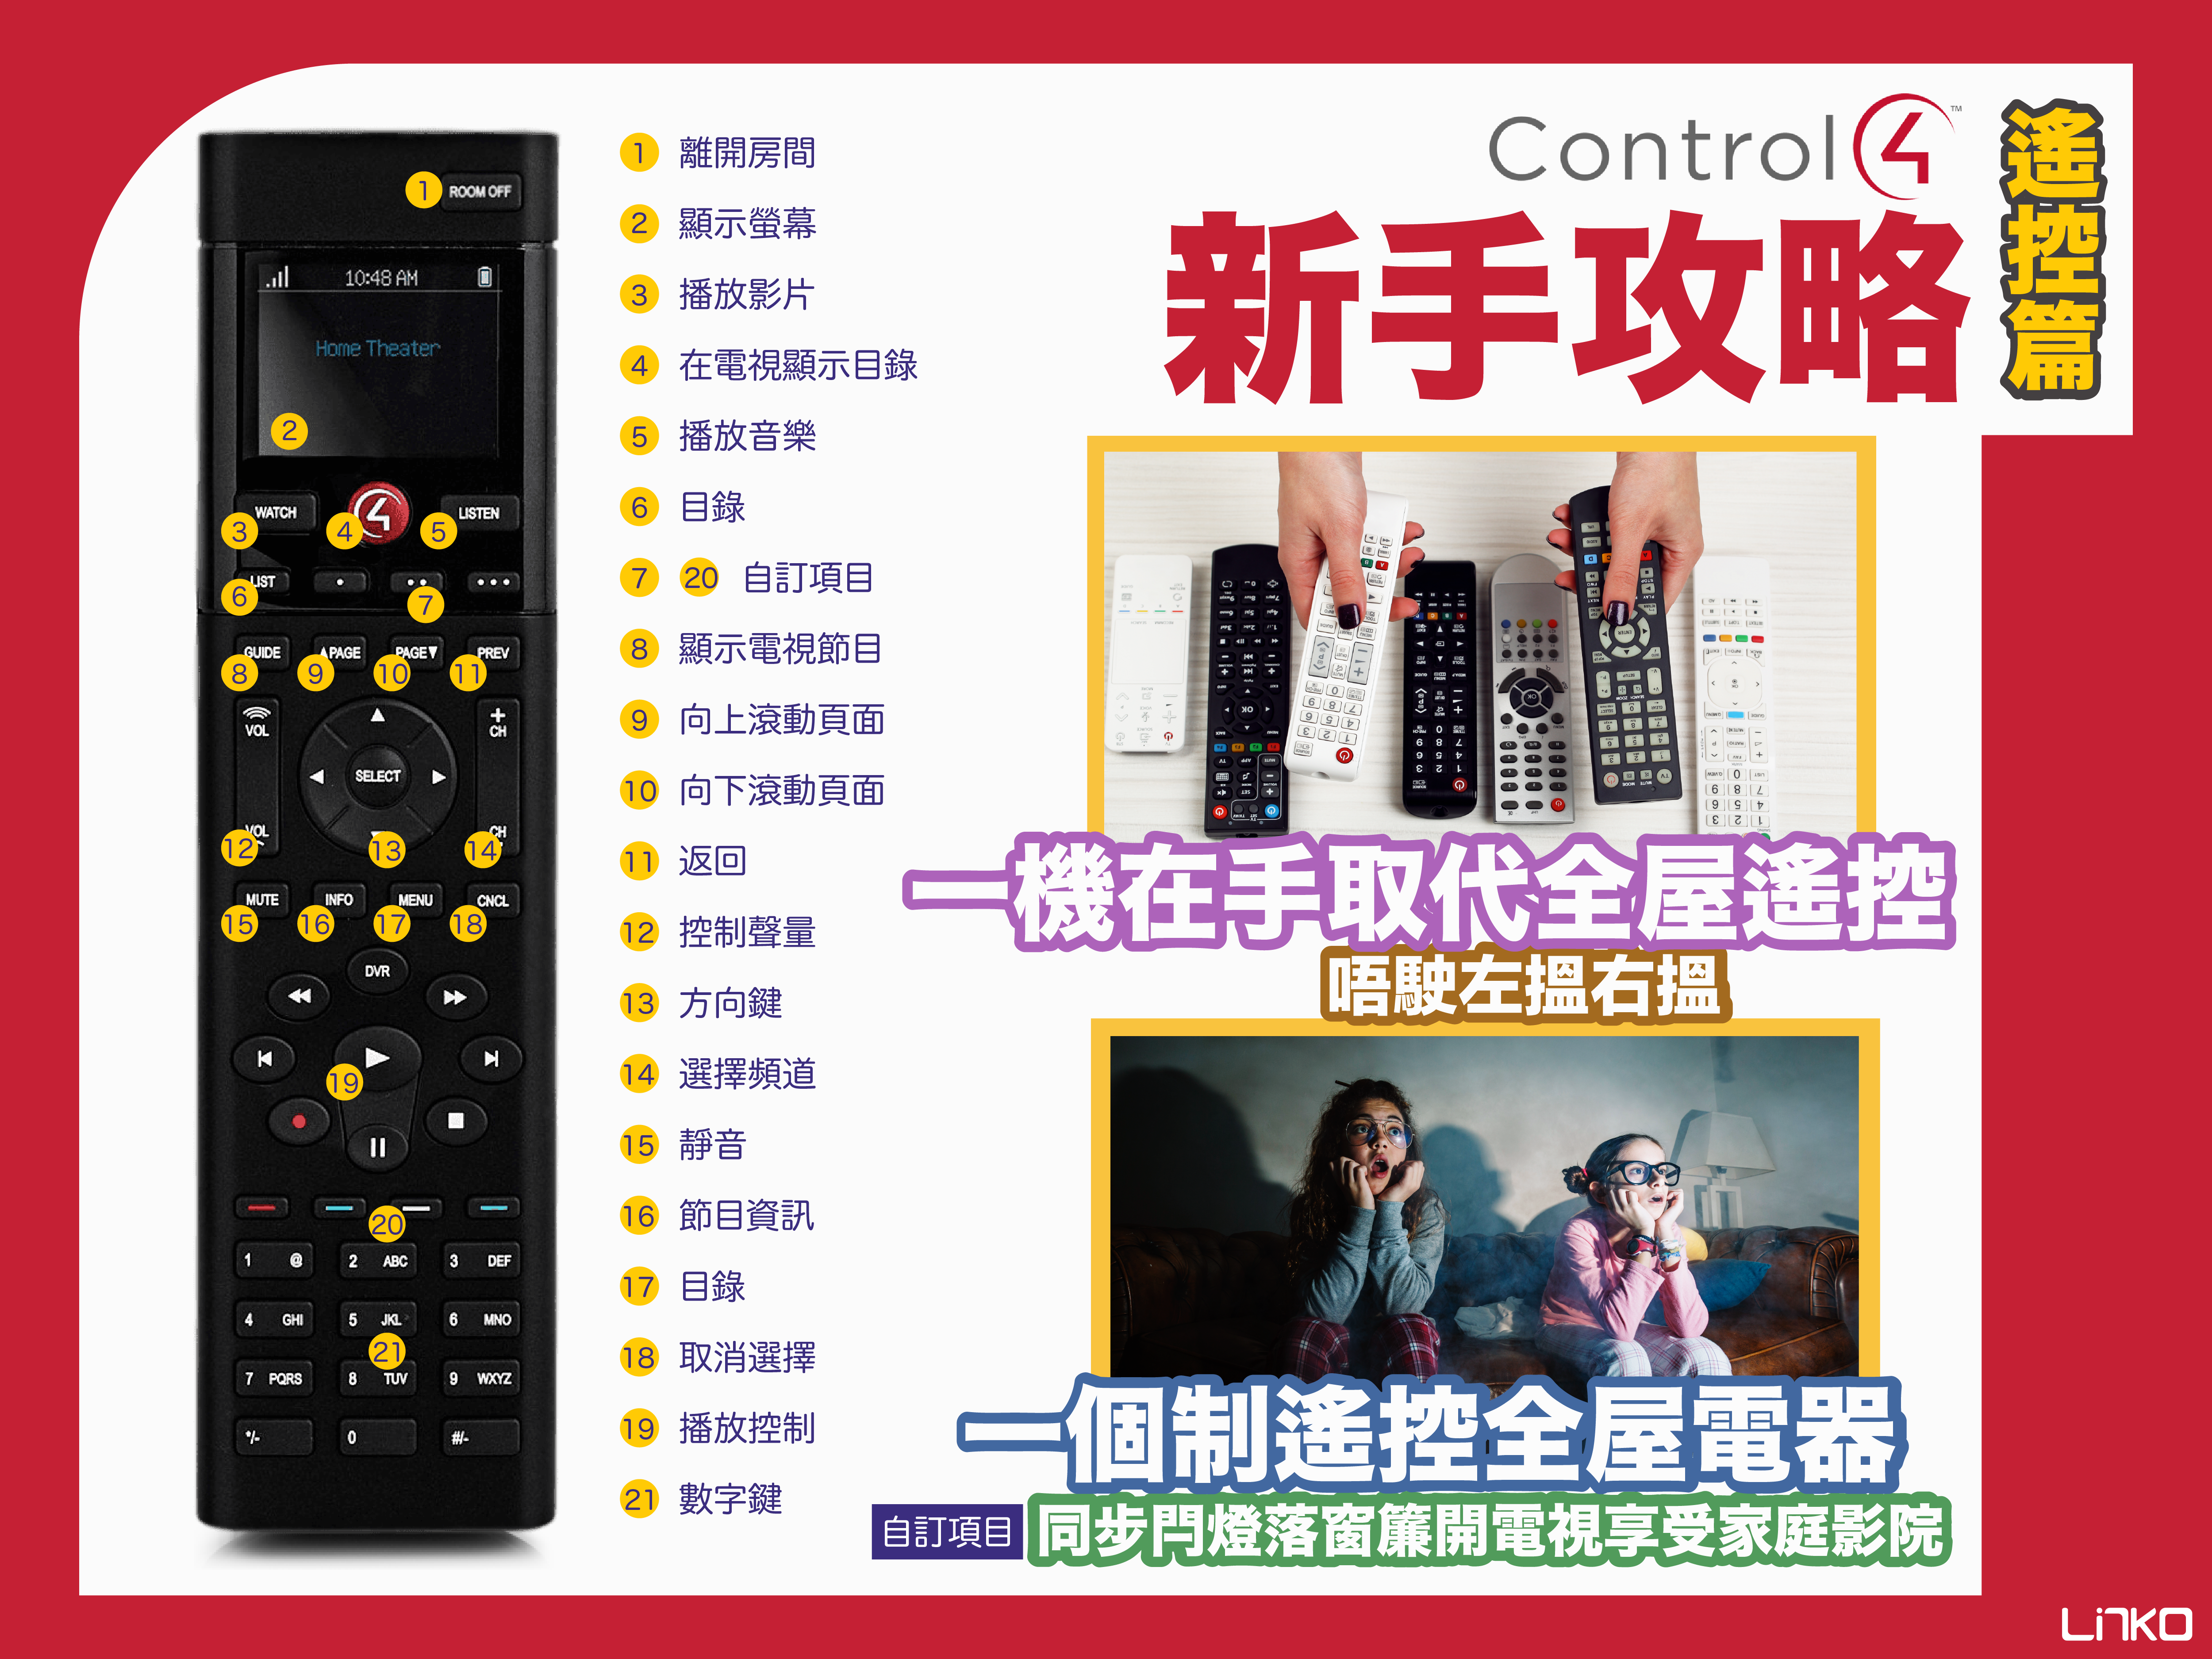 【Control4】新手攻略｜遙控篇(Chinese Version Only)